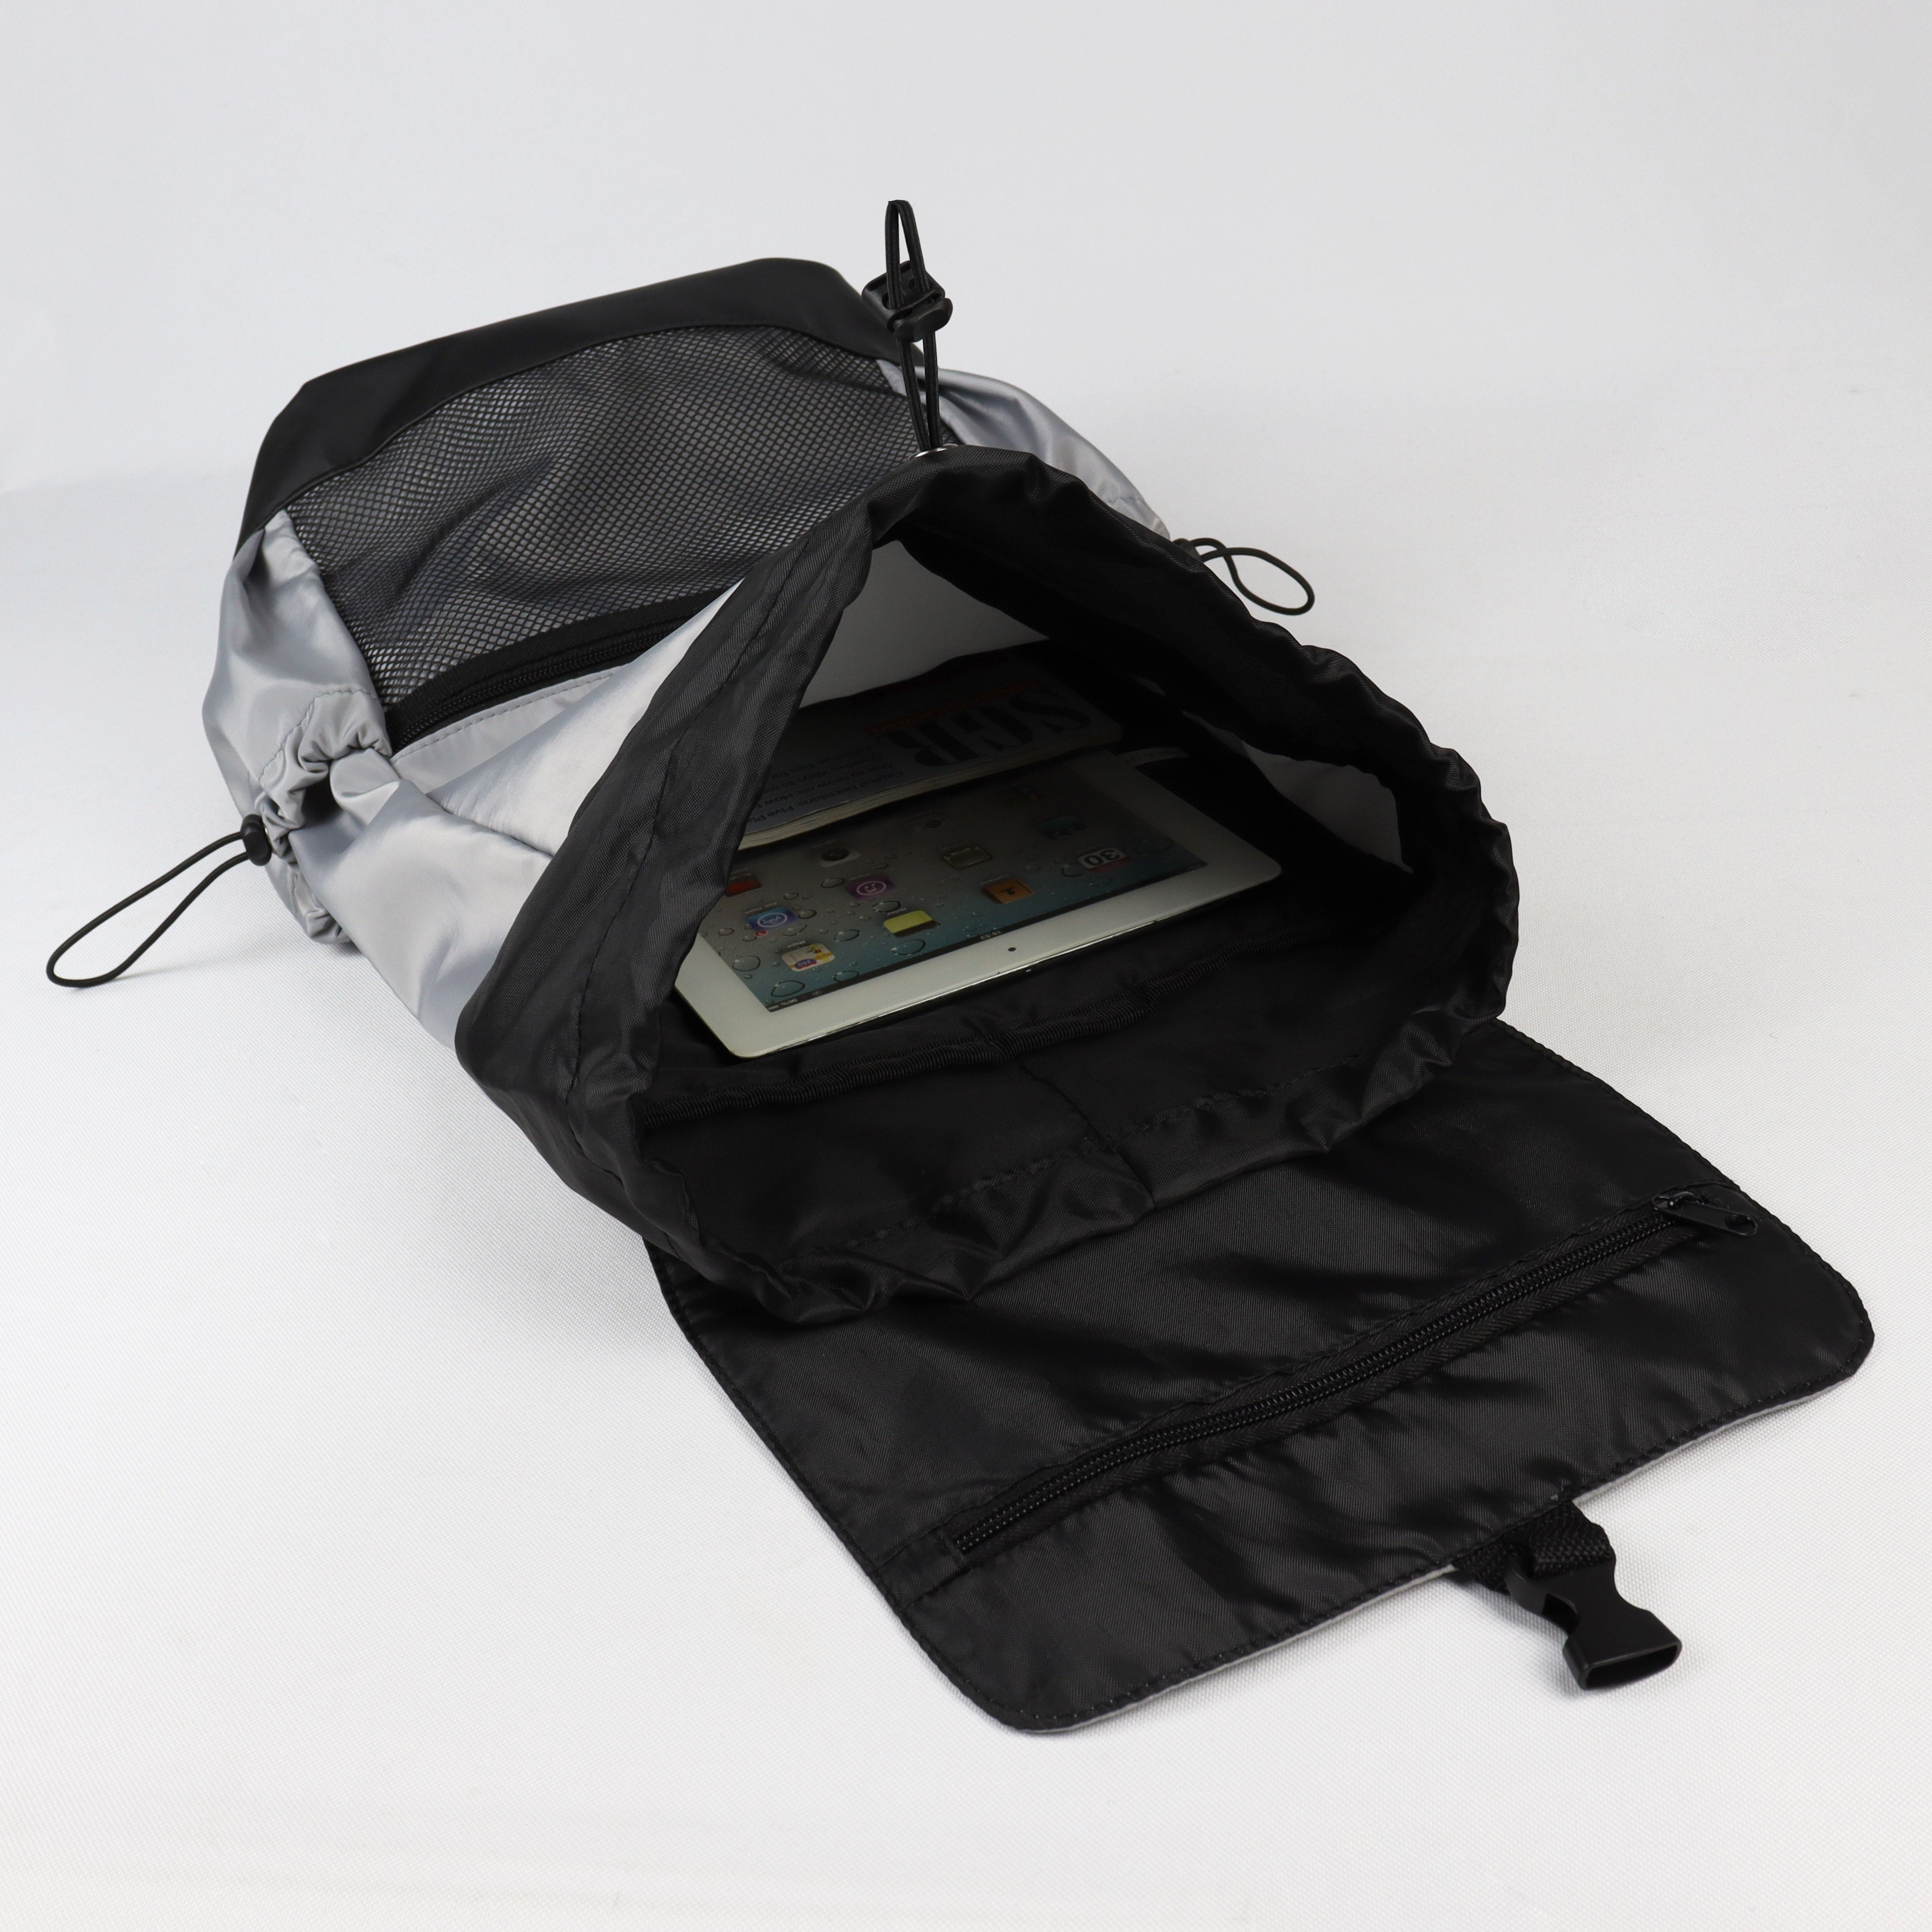 LS-ACB611 - Everyday Backpack